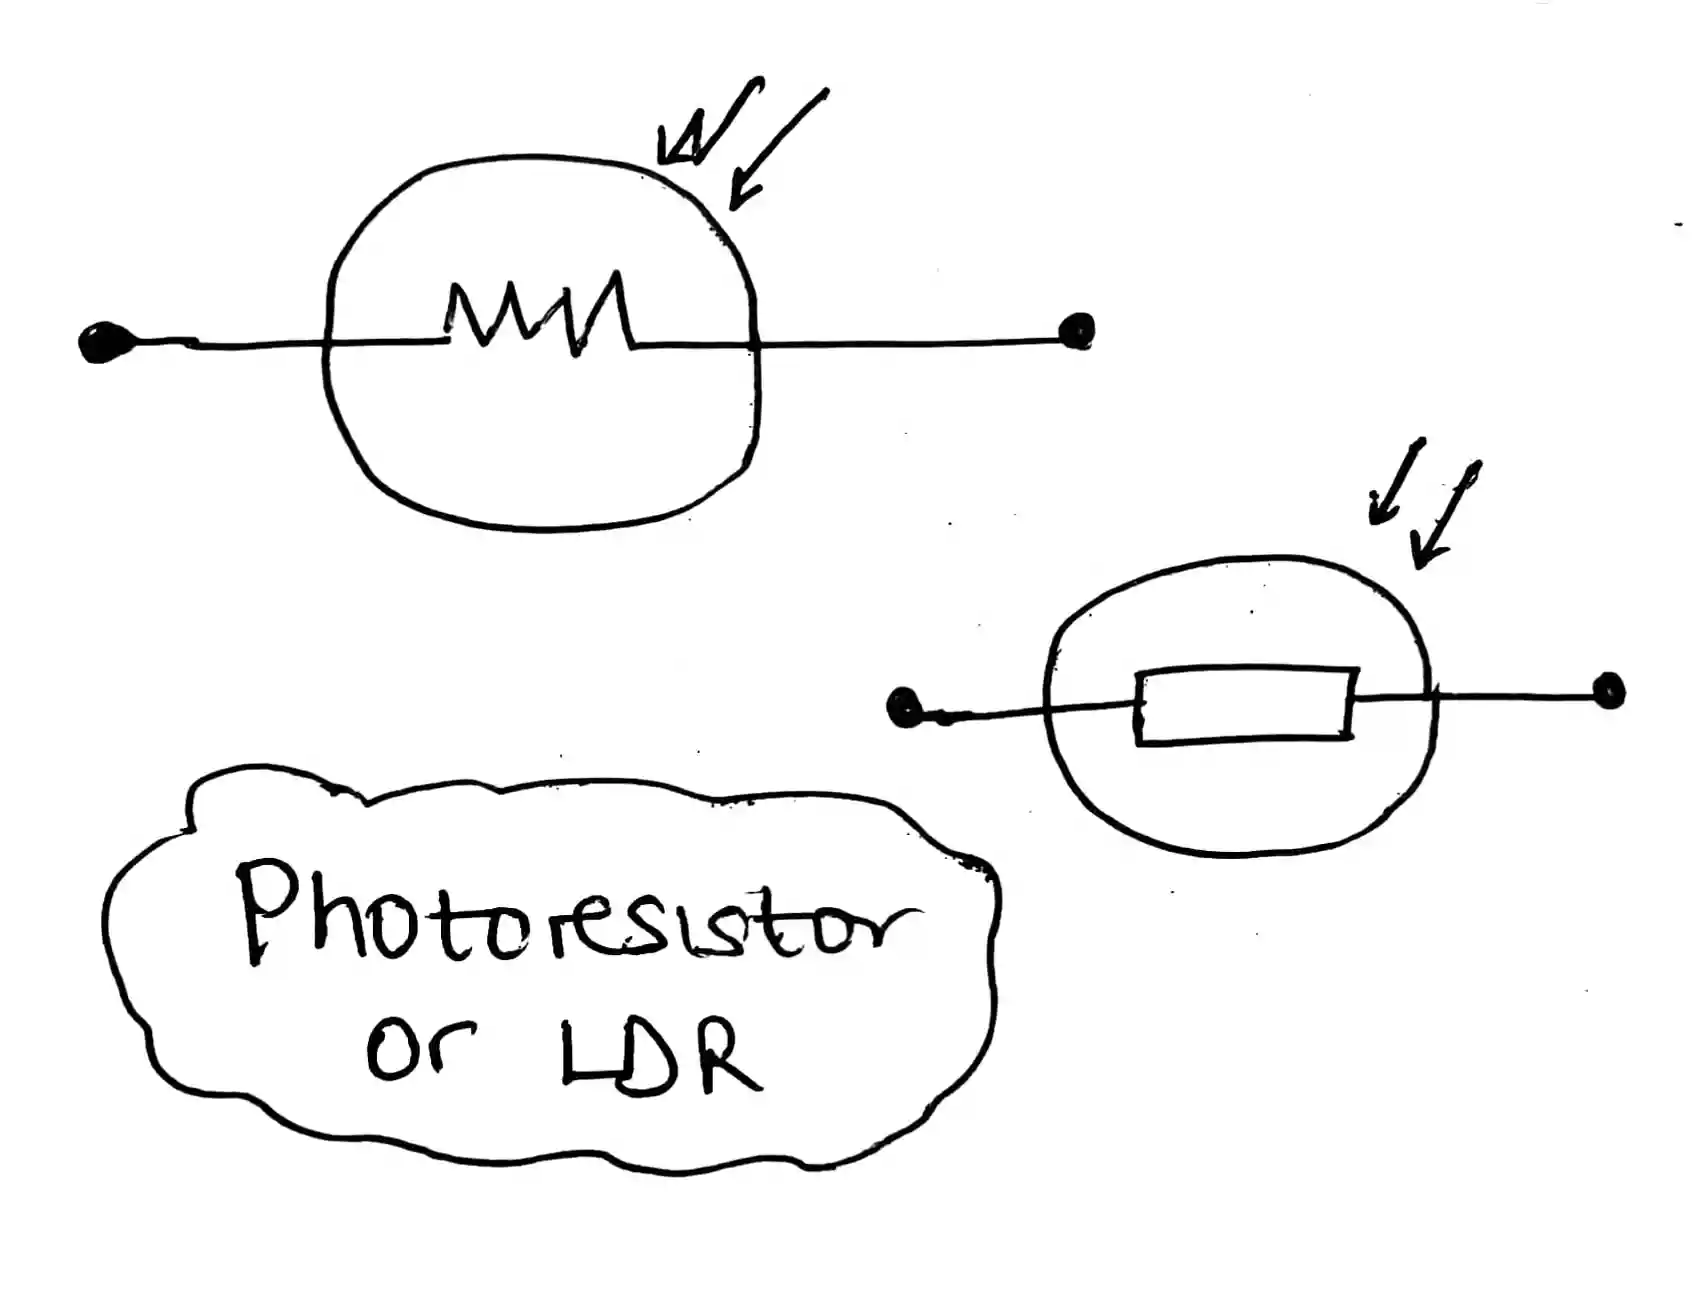 What is a photoresistor and what is it used for?